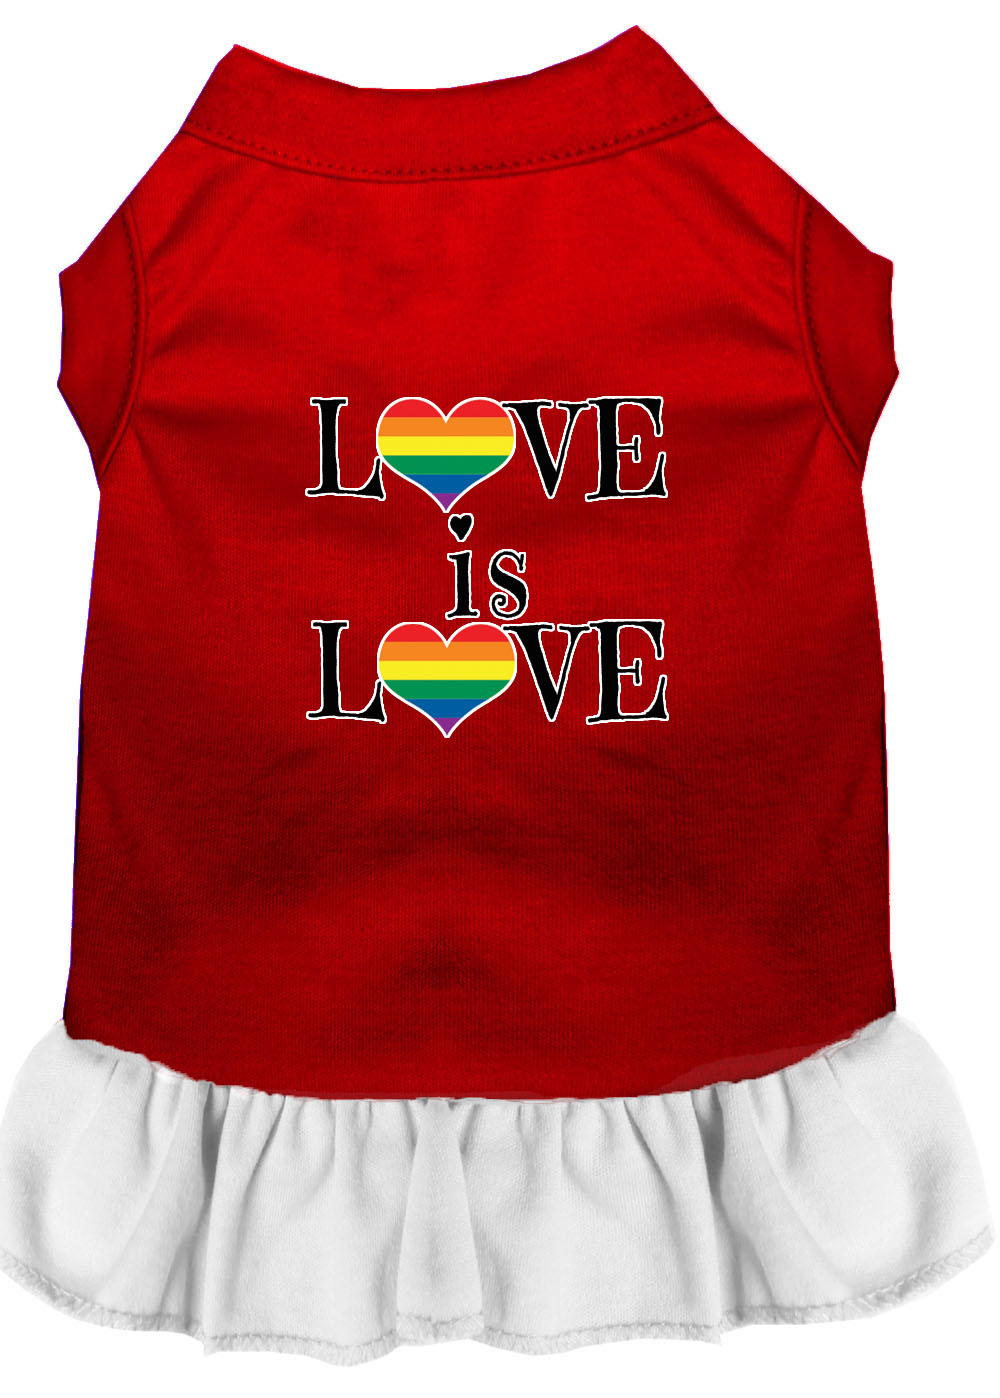 Love is Love Screen Print Dog Dress Red with White XXXL